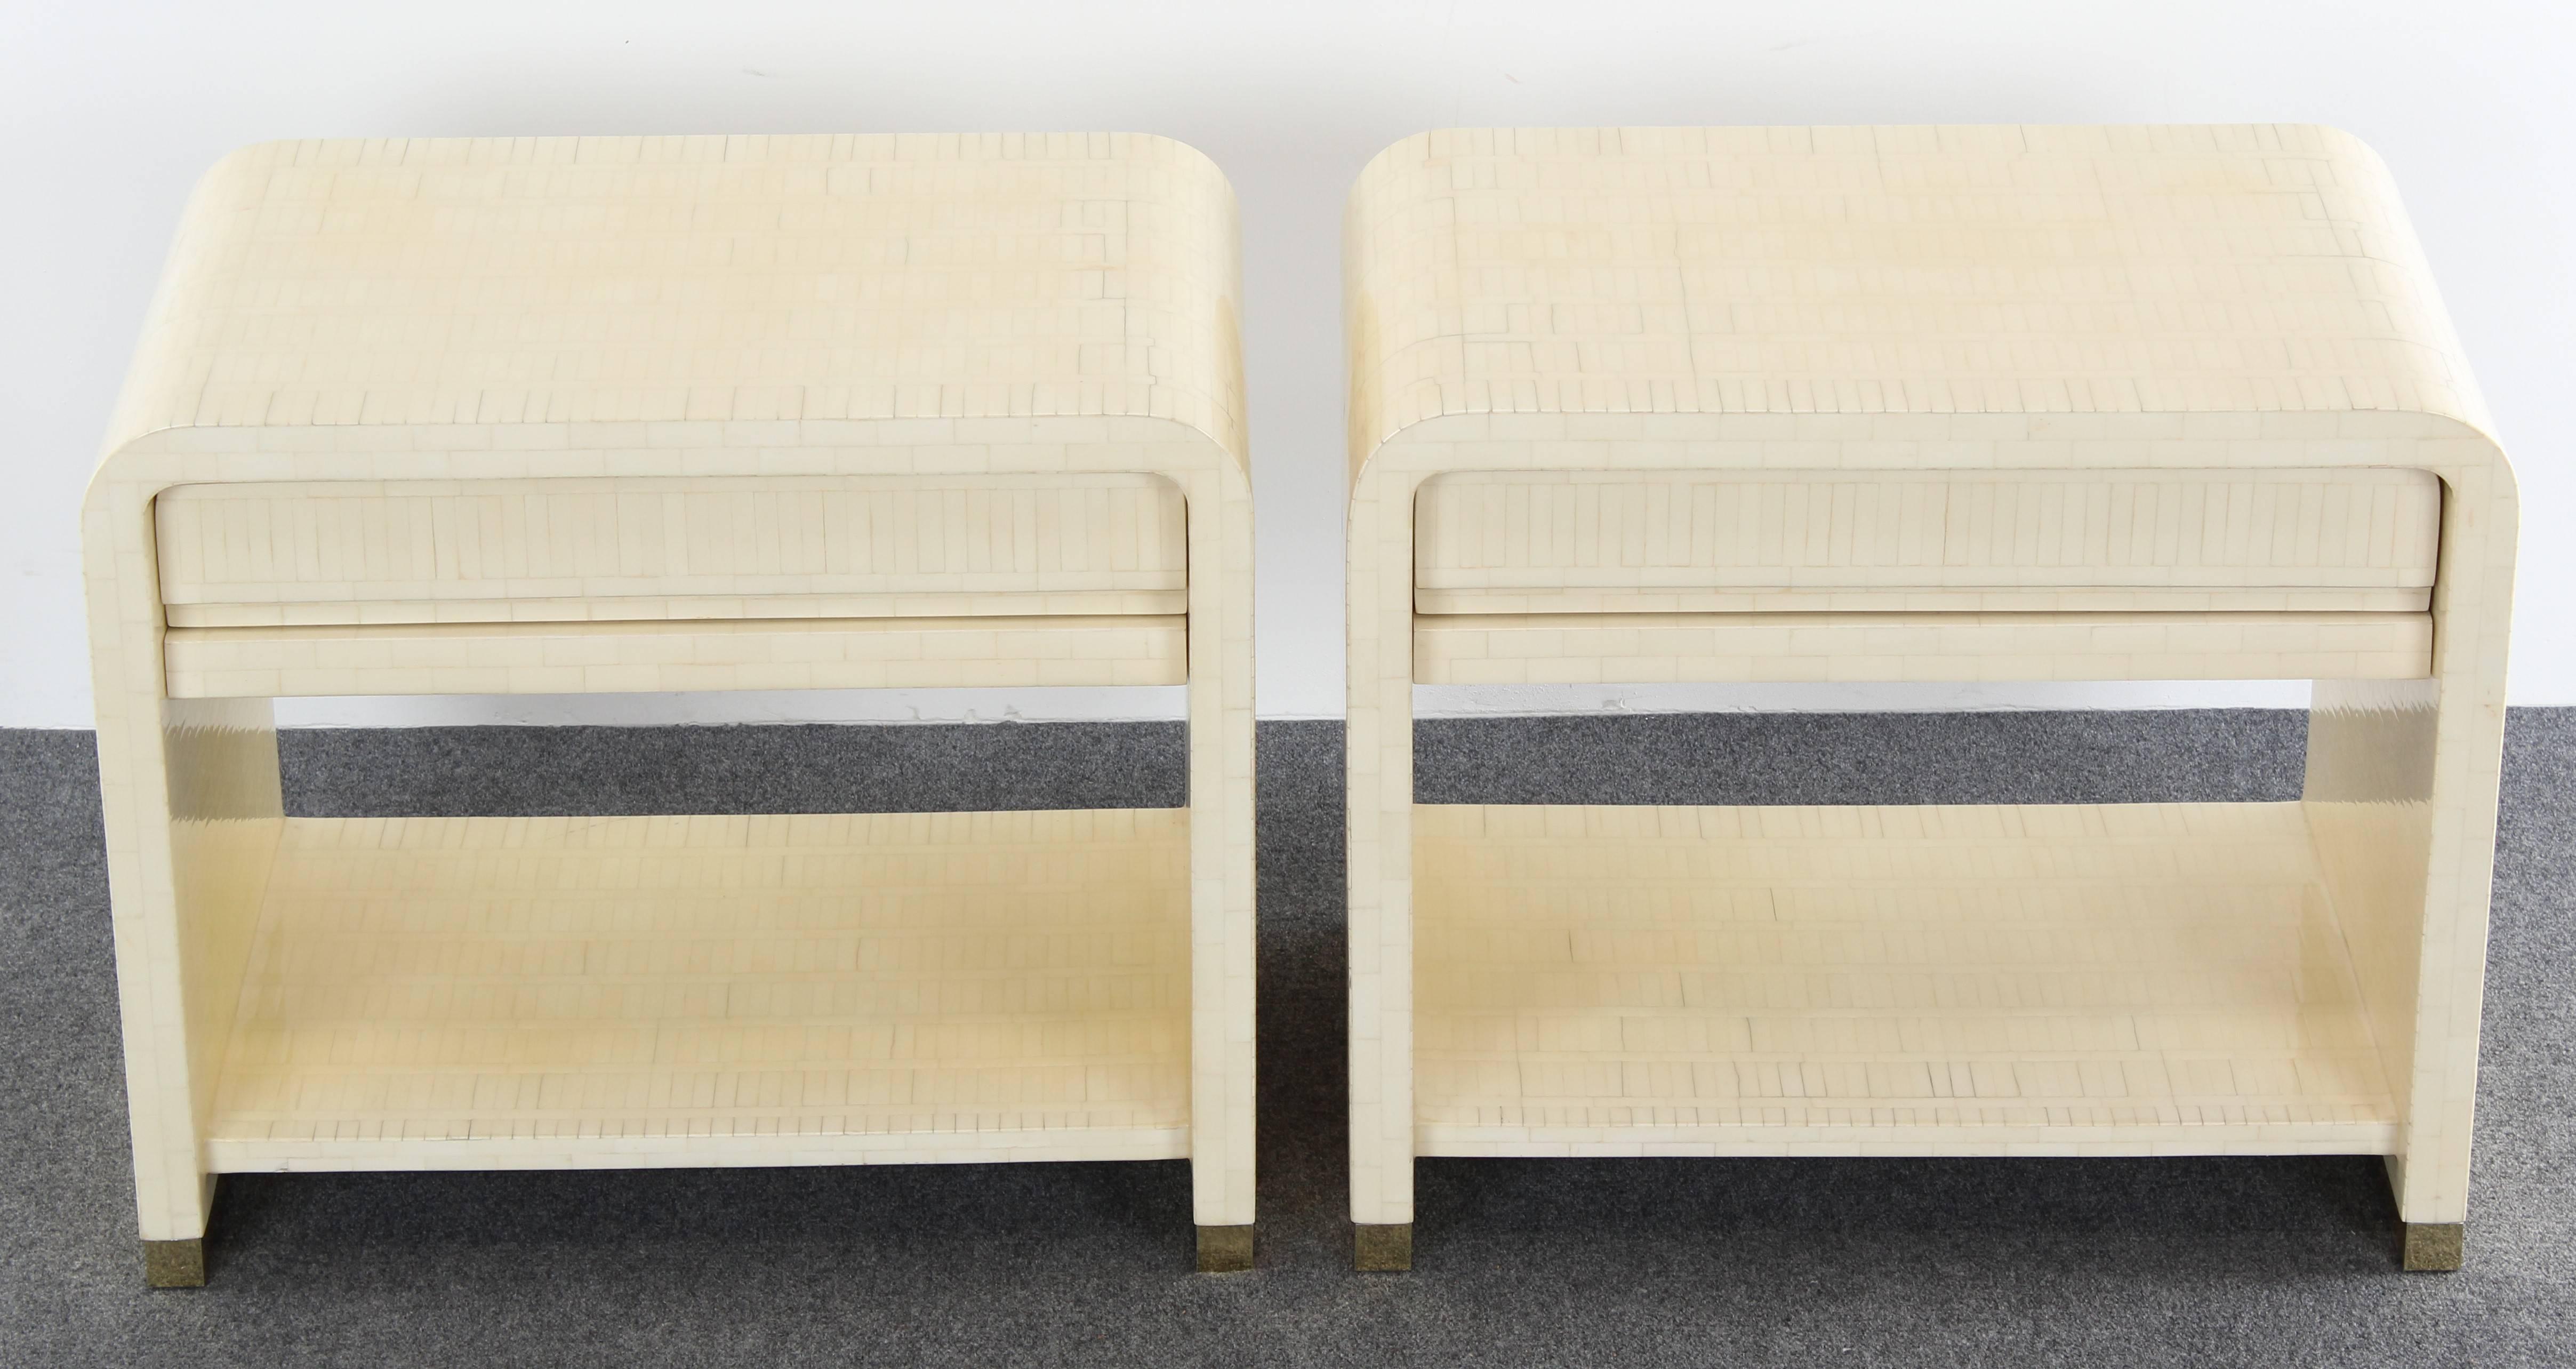 A pair of exquisite Enrique Garcel tessellated bone bedside or end tables with brass platform base. These were purchased in 1988 with original bill of receipt for $7,500. Good condition with age appropriate wear.